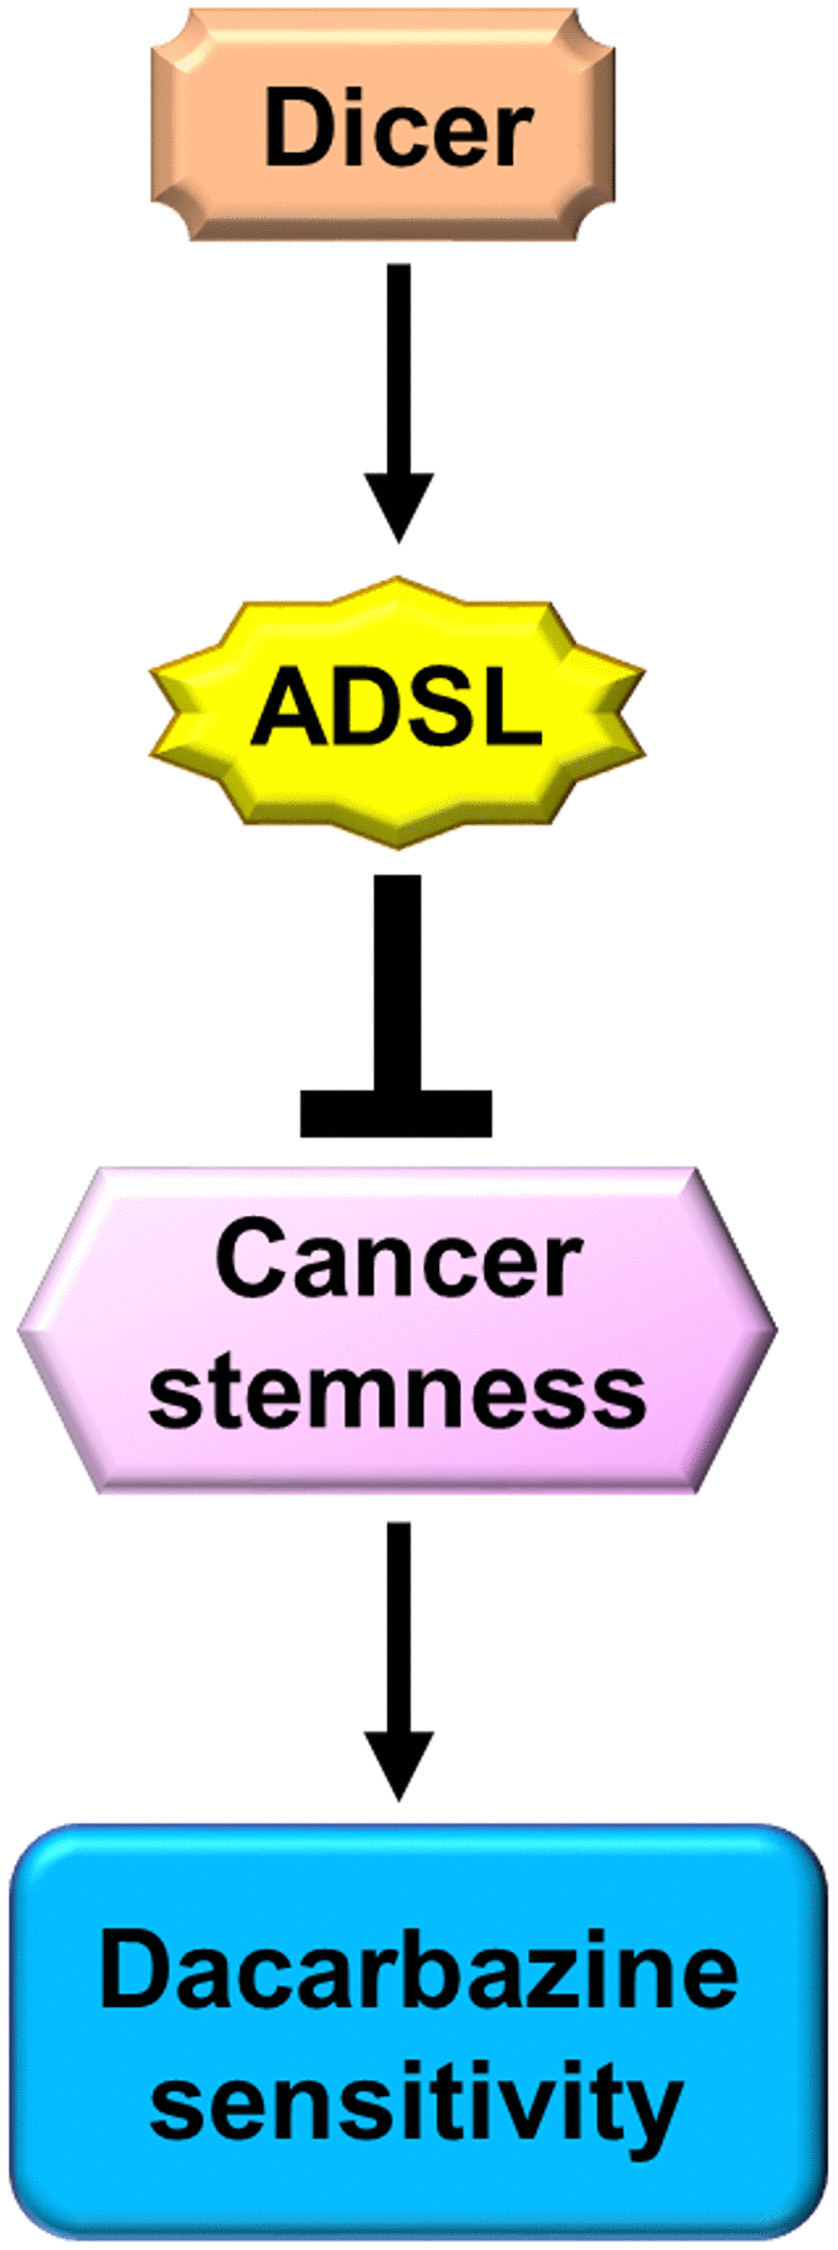 Schematic of Dicer-induced, ADSL-mediated DTIC resistance and augmented stemness in melanoma cells.